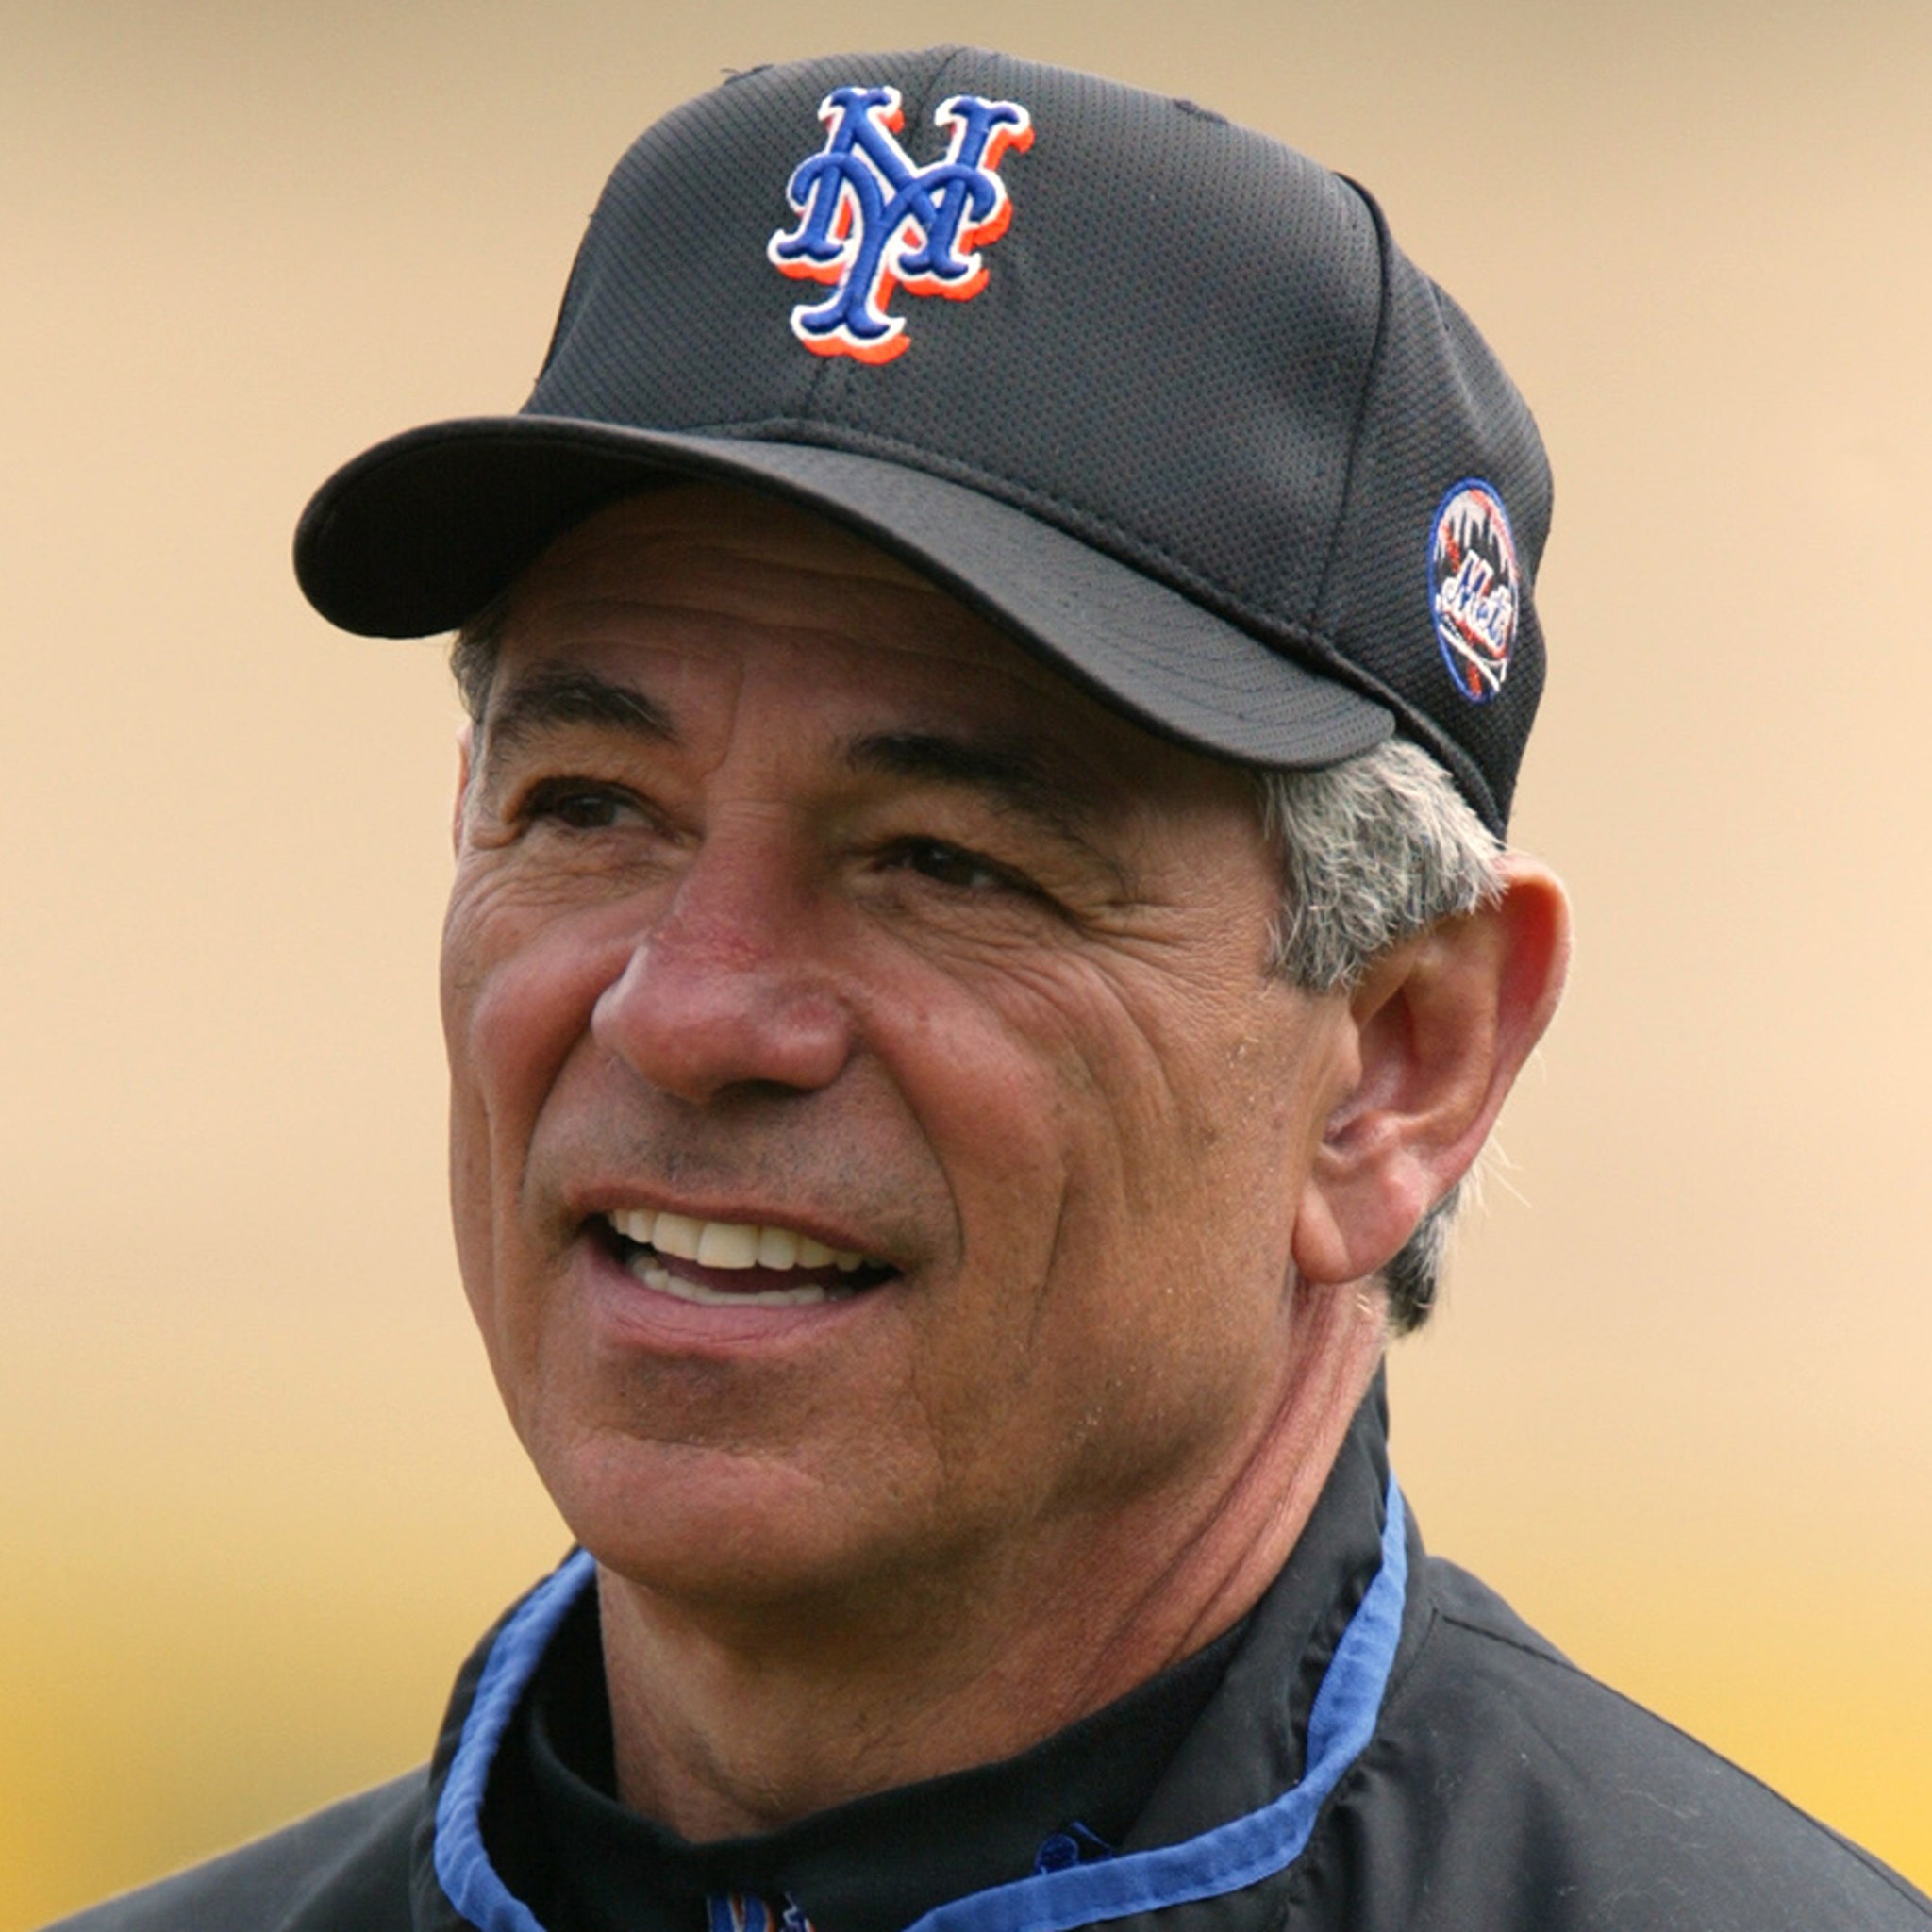 Bobby Valentine's mustache disguise with Mets